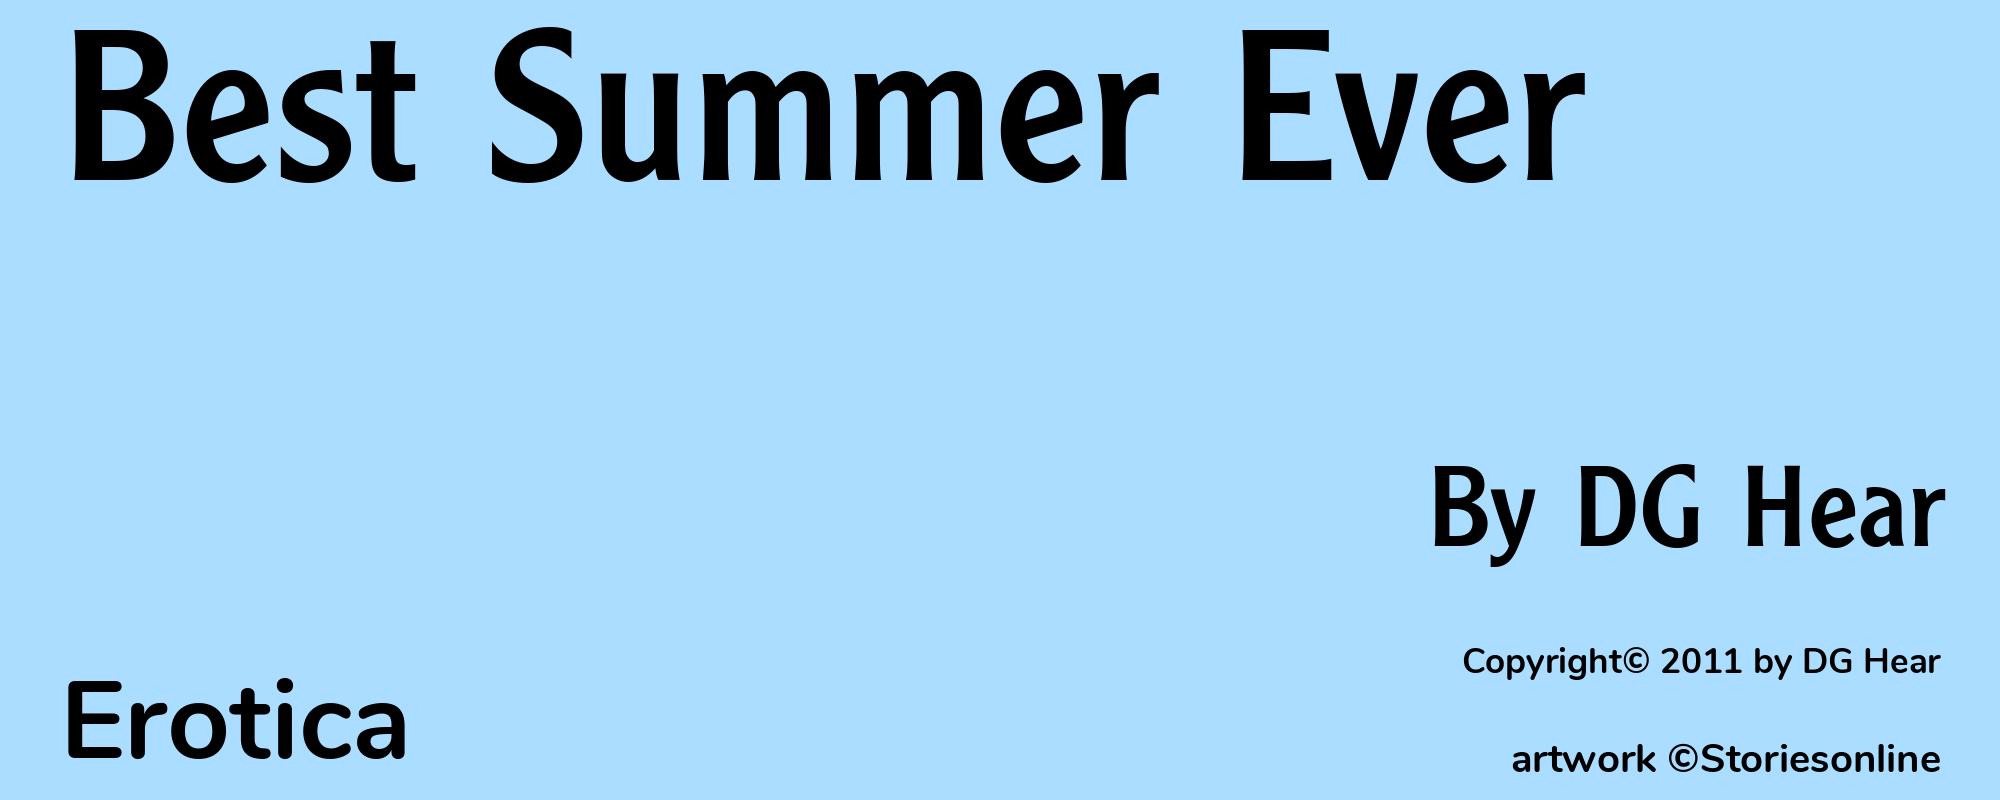 Best Summer Ever - Cover